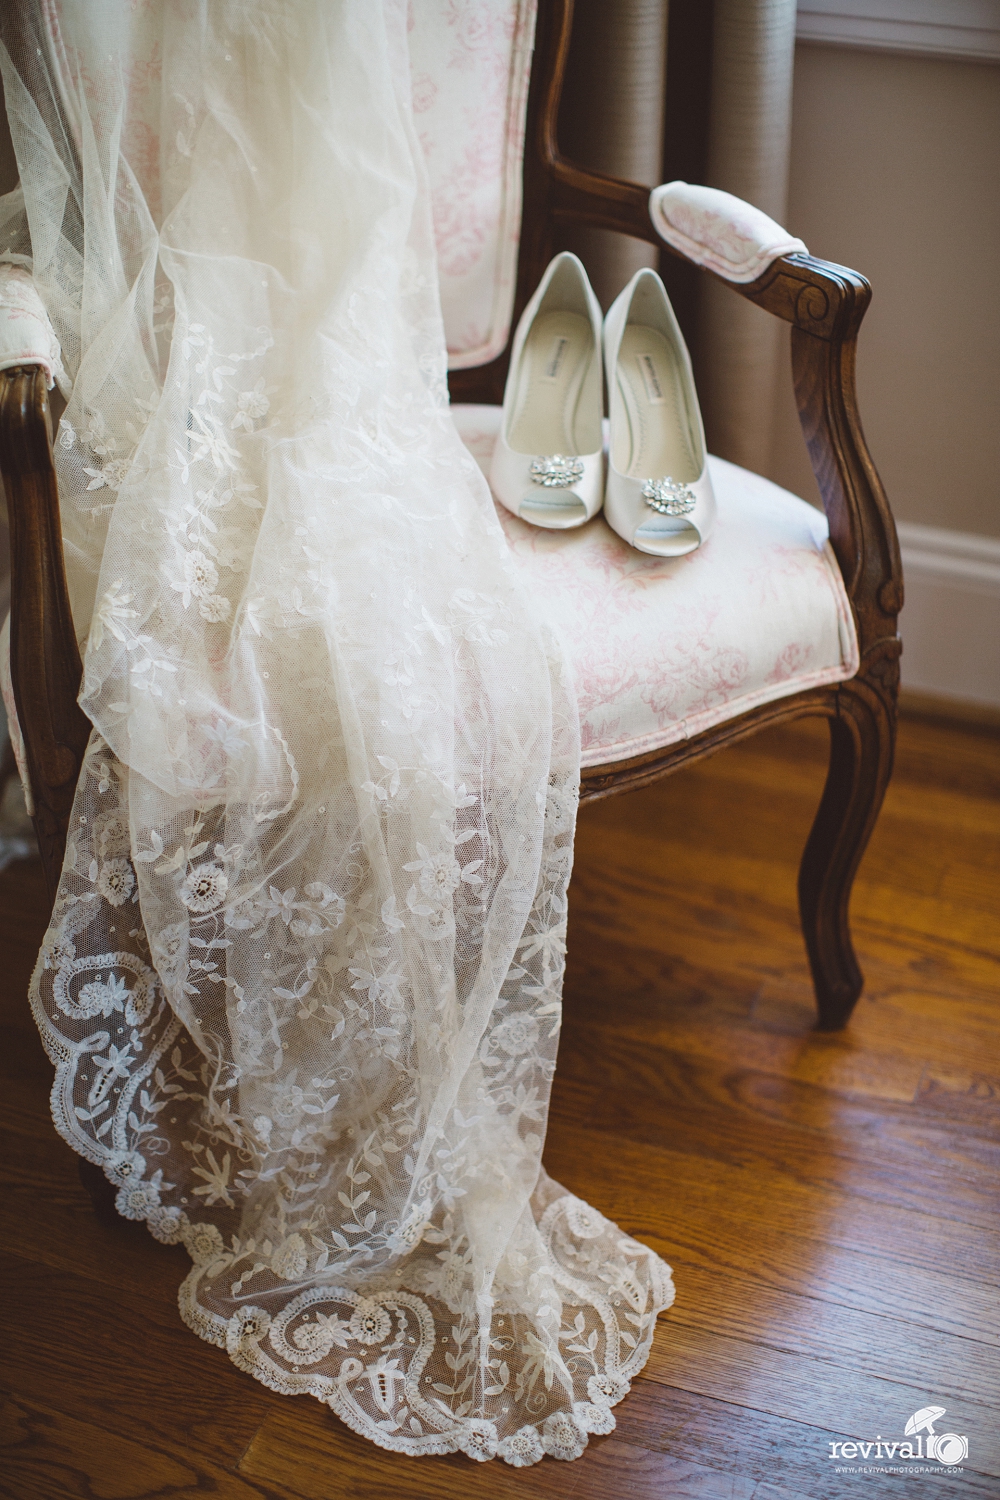 Wedding Traditions: How to Do "Something Old, Something New" by Revival Photography NC Wedding Photographers www.revivalphotography.com